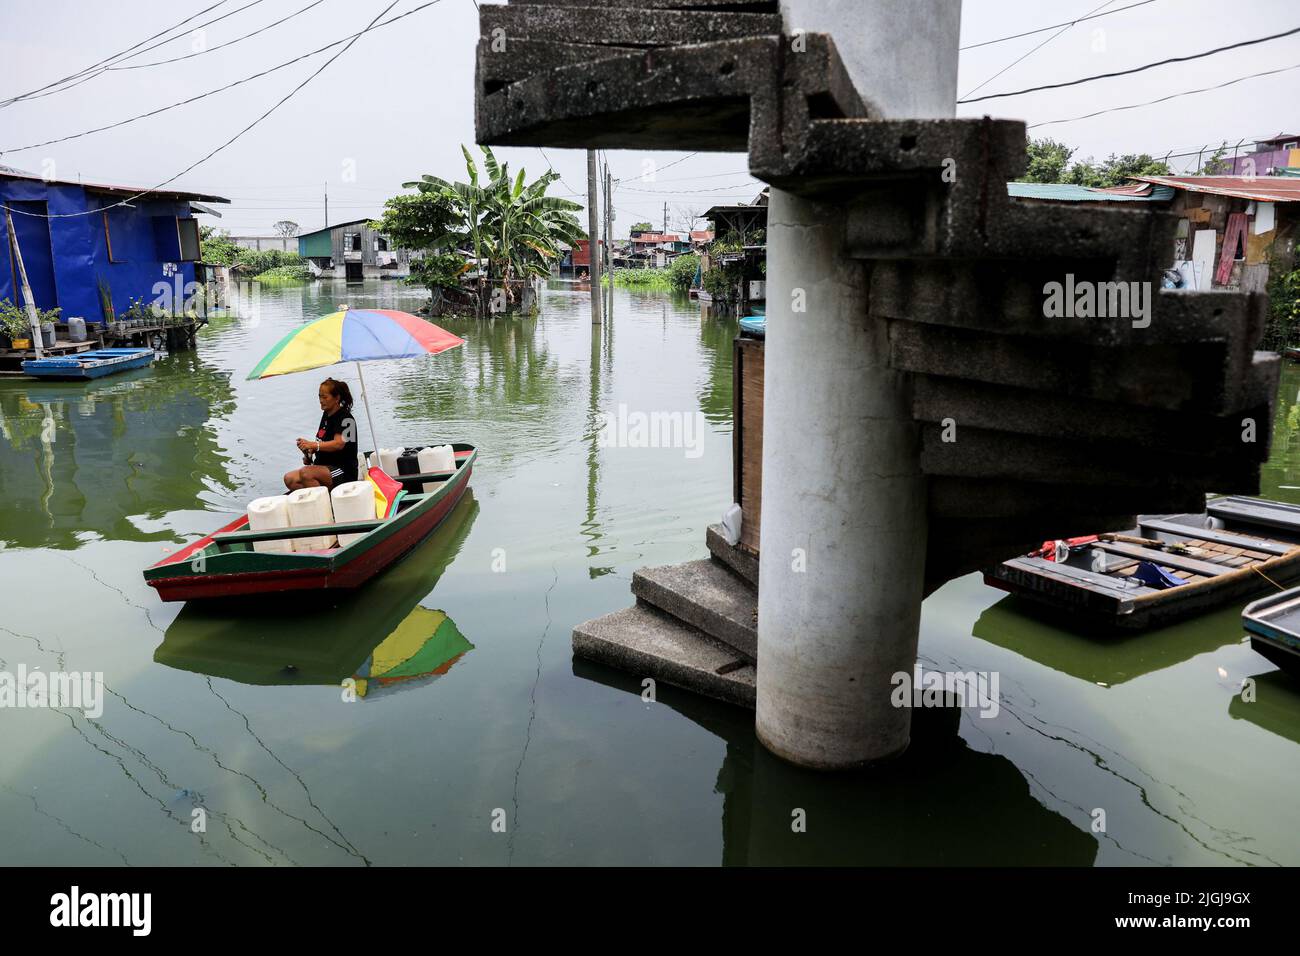 A woman paddles on stagnant floodwaters  inside the Artex Compound in Malabon, Metro Manila. The village has been flooded by stagnant waters for several years. The inhabitants, who are mostly poor, have to use boats for their daily mode of transportation, and even visiting their neighbors has become a tedious effort. In order to get access to basic necessities like groceries, residents need transport to other parts of the city that are not flooded. One of the biggest problems for the residents living in the area is getting clean water for day-to-day life. Philippines. Stock Photo